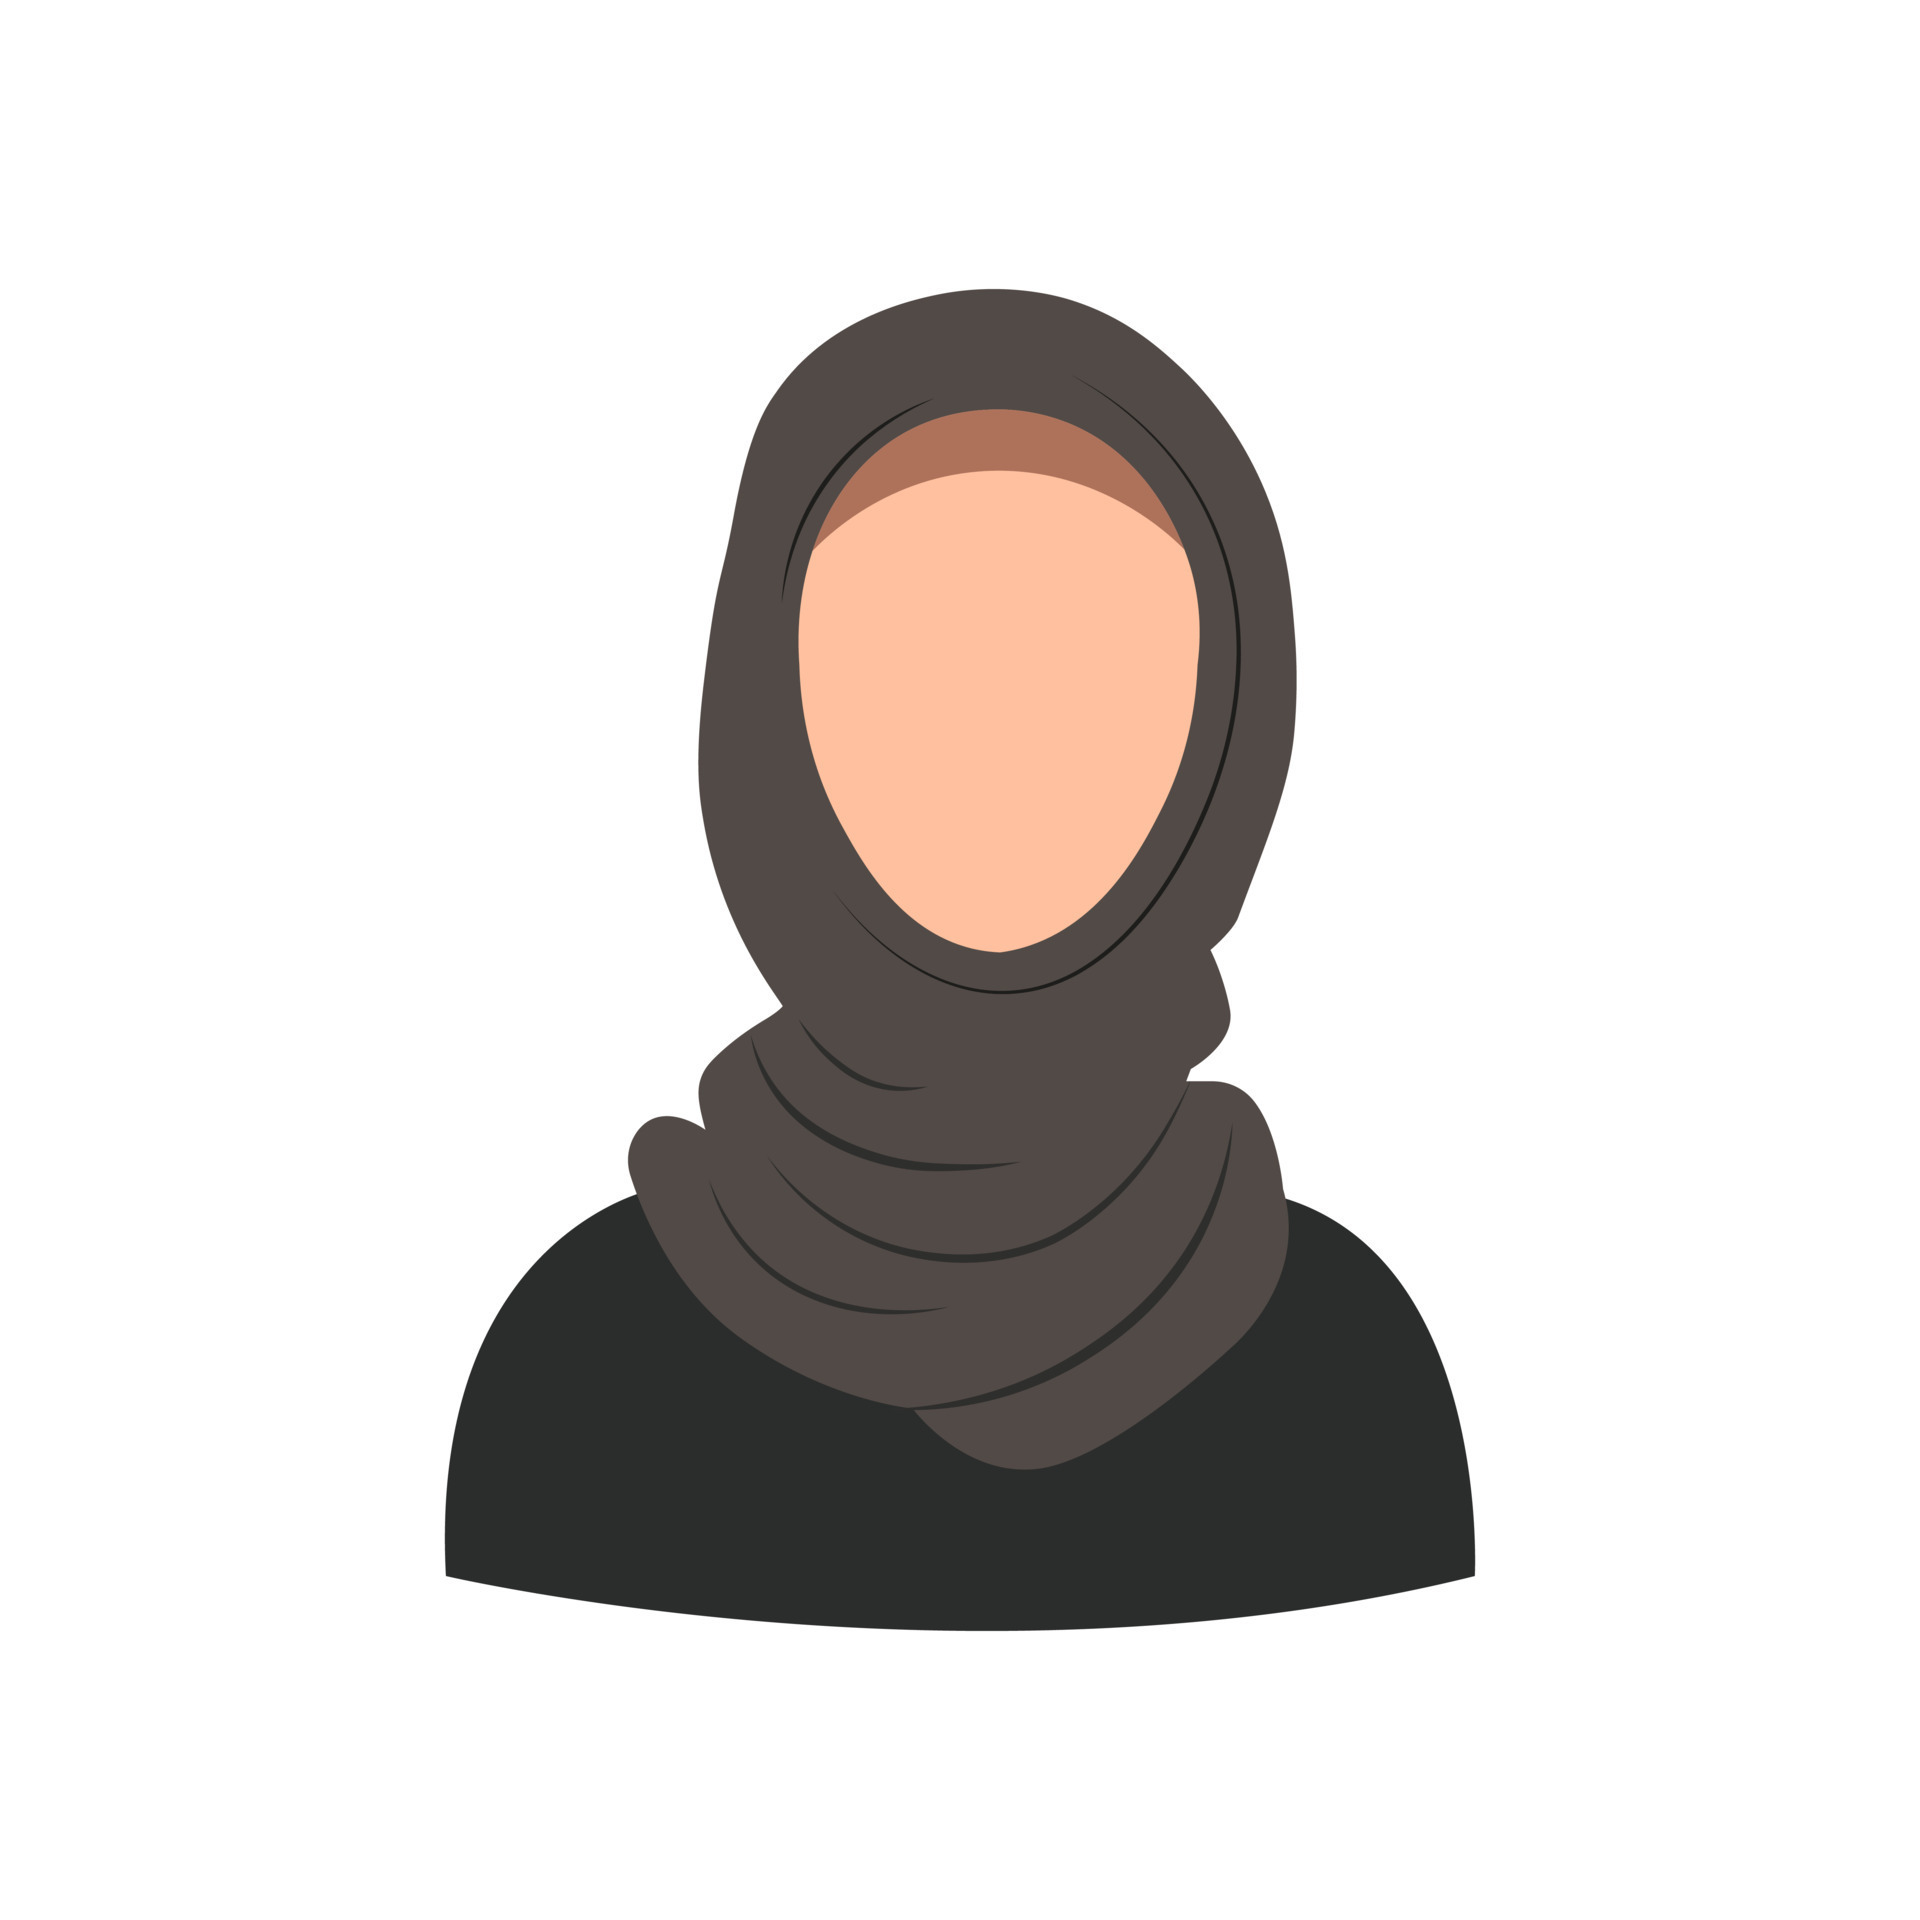 arab-woman-face-covered-with-hijab-muslim-woman-muslim-girl-avatar-avatar-icon-in-flat-style-smiling-girl-in-a-scarf-isolated-illustration-vector